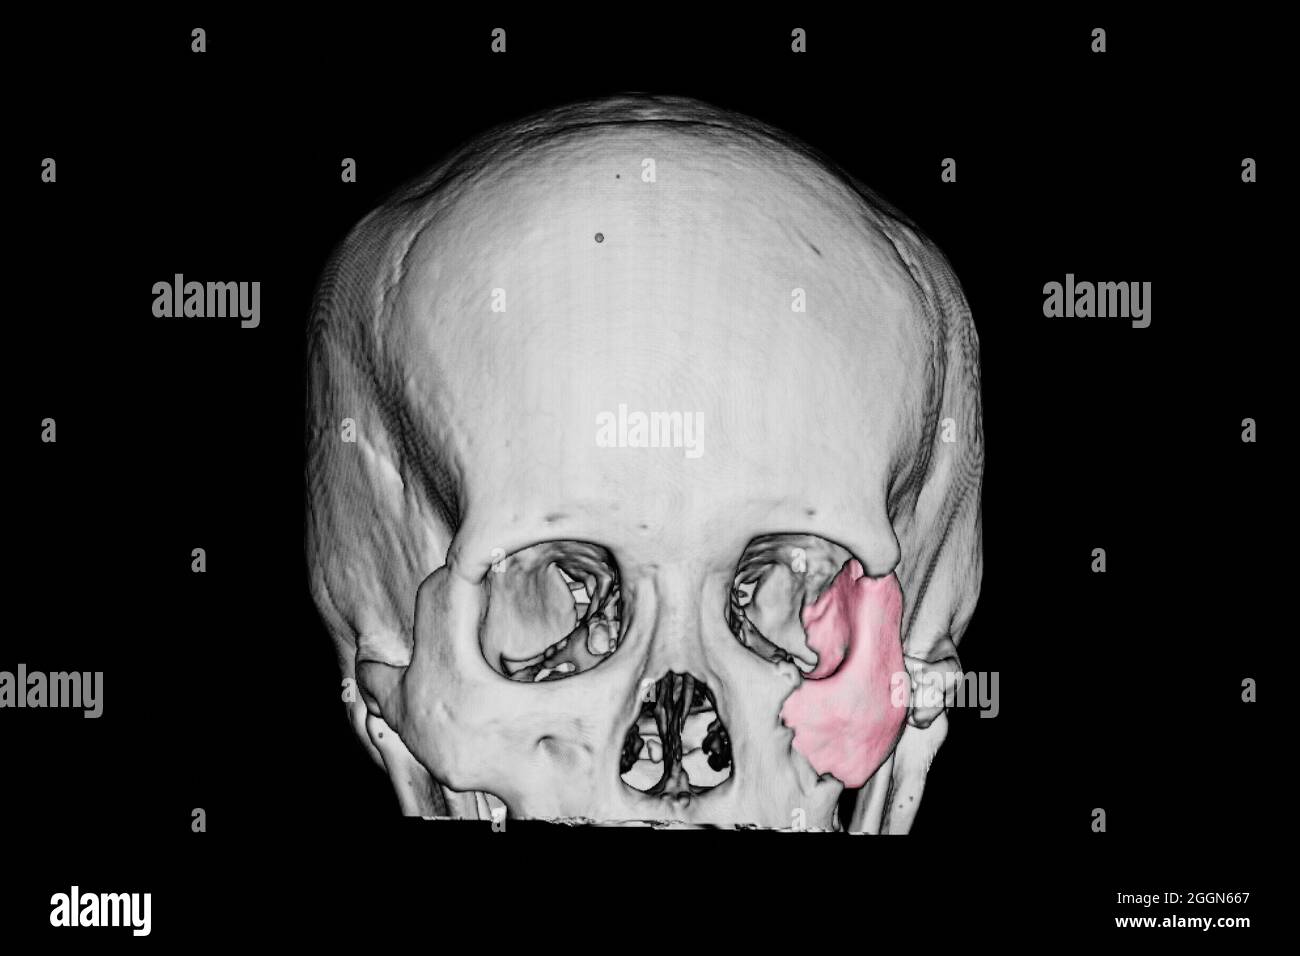 3-D redering film of a patient skull with traumatic brain injury showing fractured zygomatic bone (pink area) Stock Photo